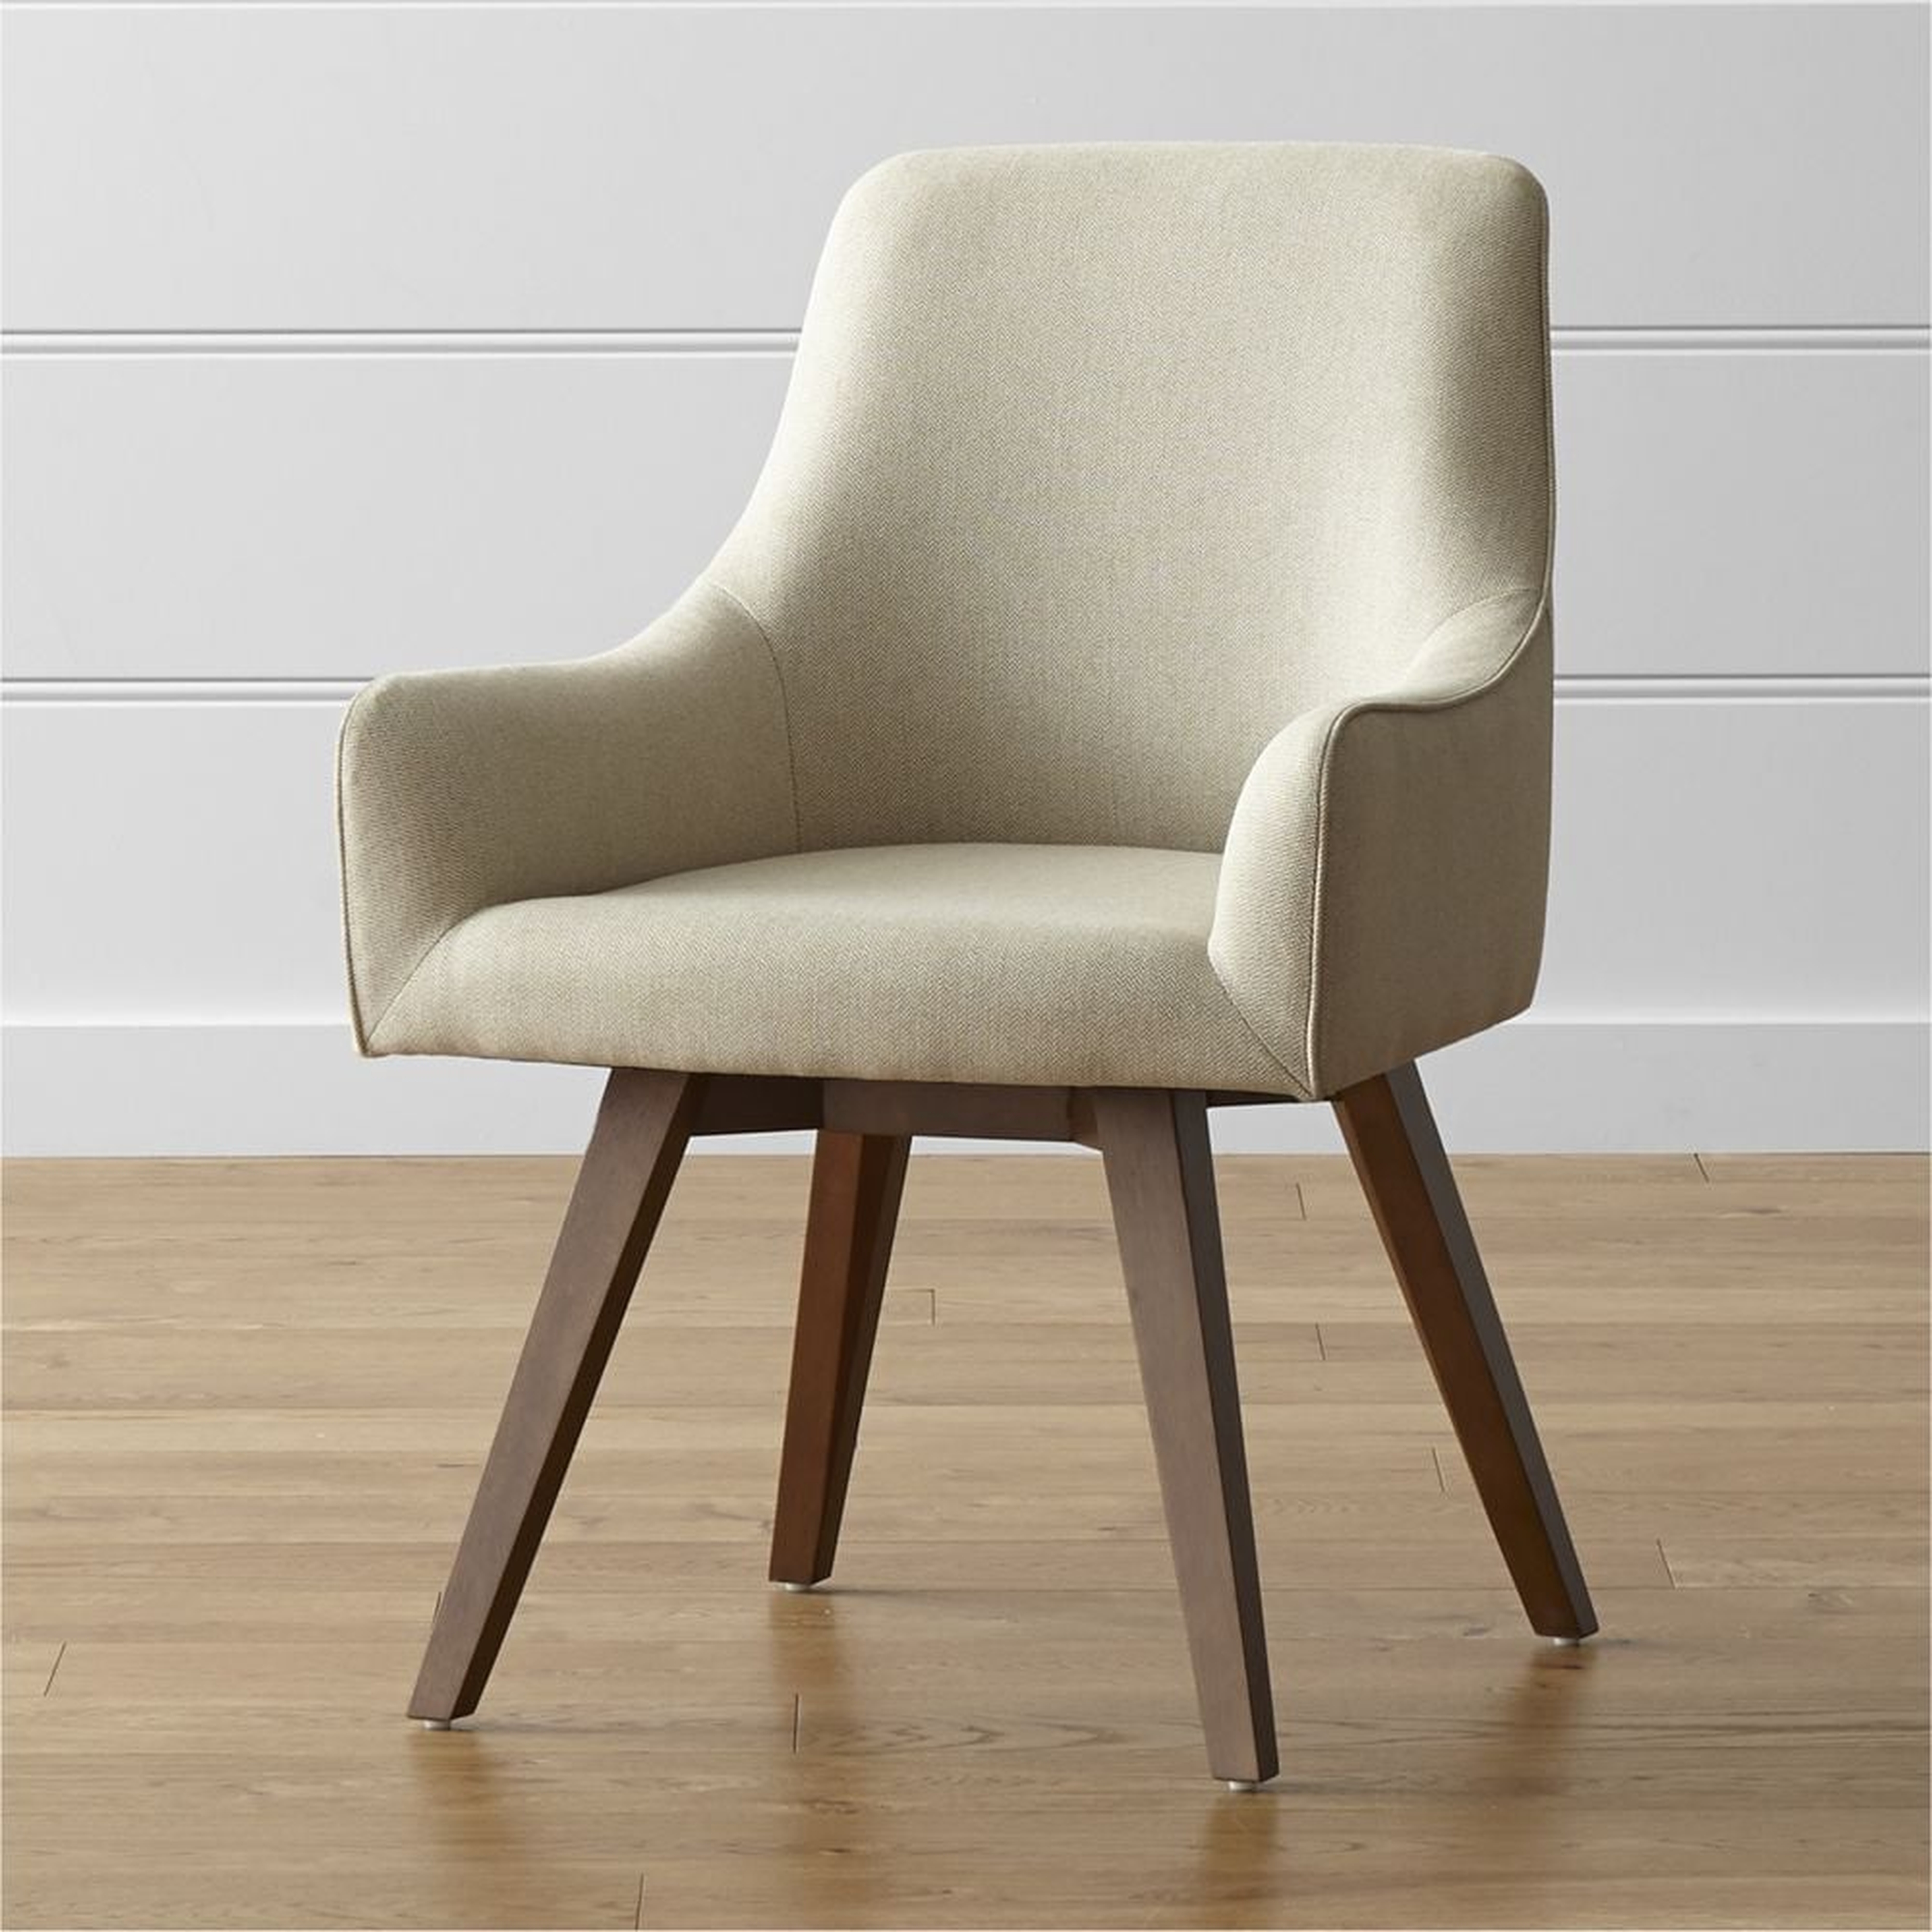 Harvey Chair Natural - Crate and Barrel